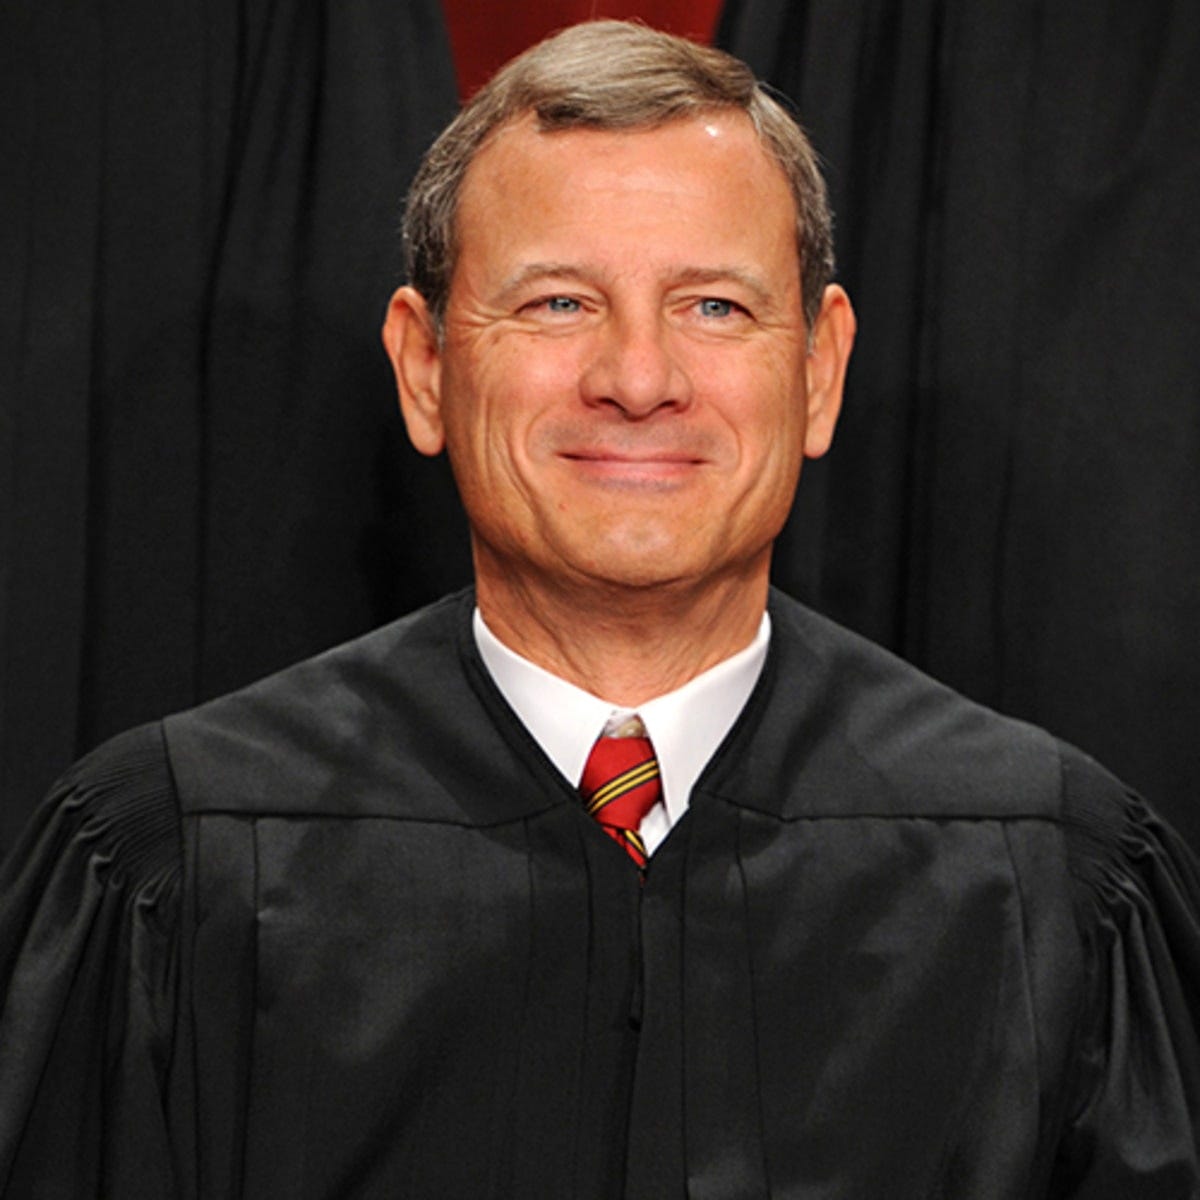 John Roberts - Education, Age & Chief Justice - Biography